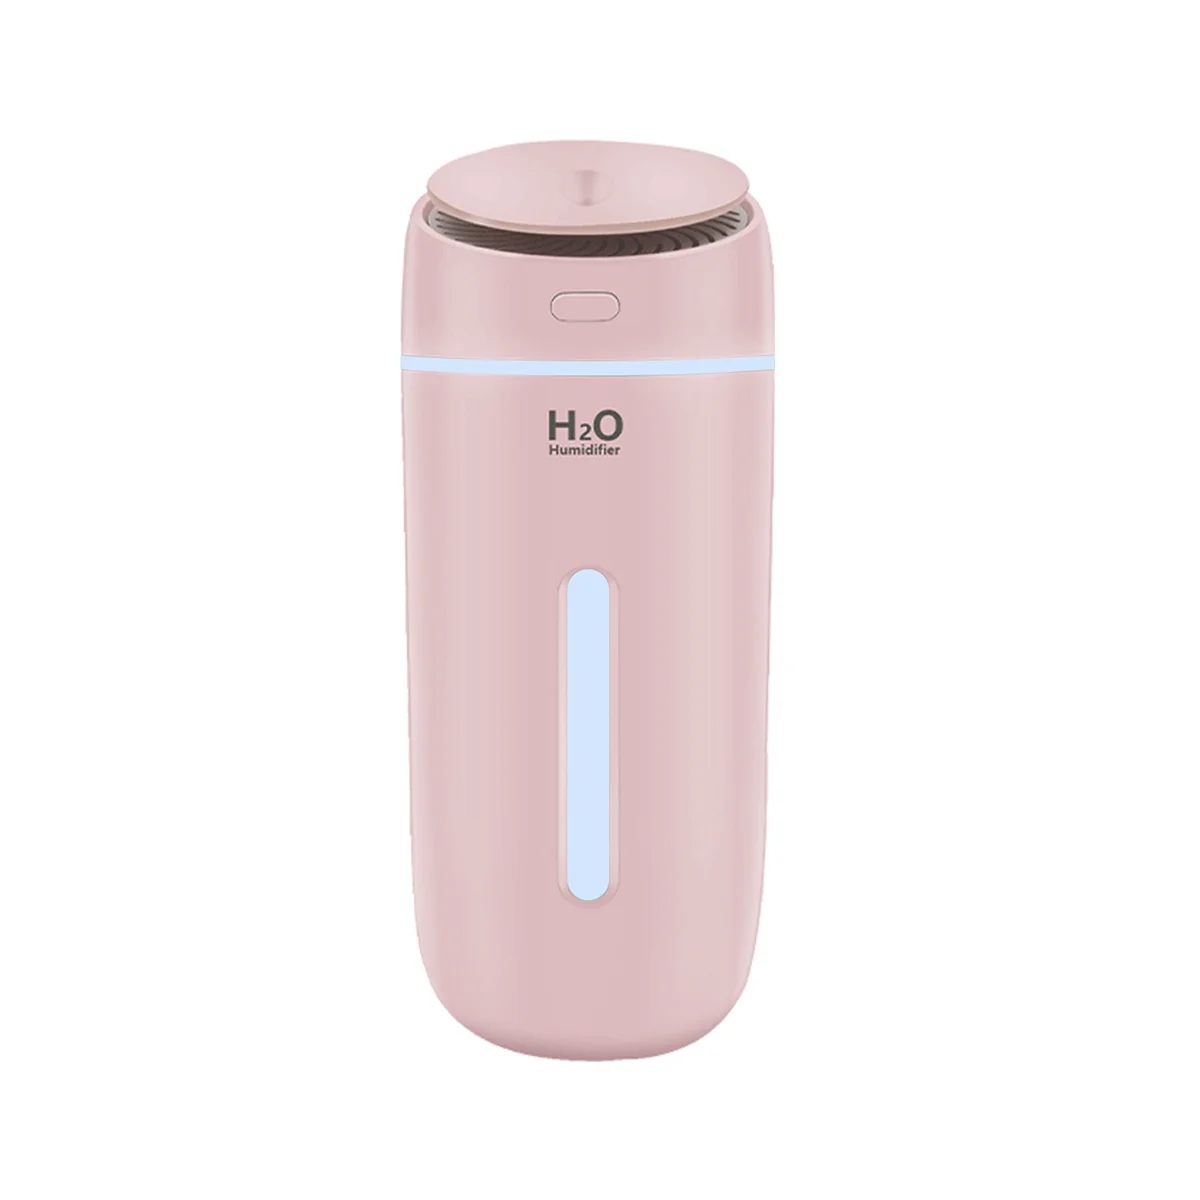 

Car Mini Humidifier Home 400Ml Small Cool Mist Air Humidifier with 7 Color LED Night Light, Whisper USB Humidifiers,B